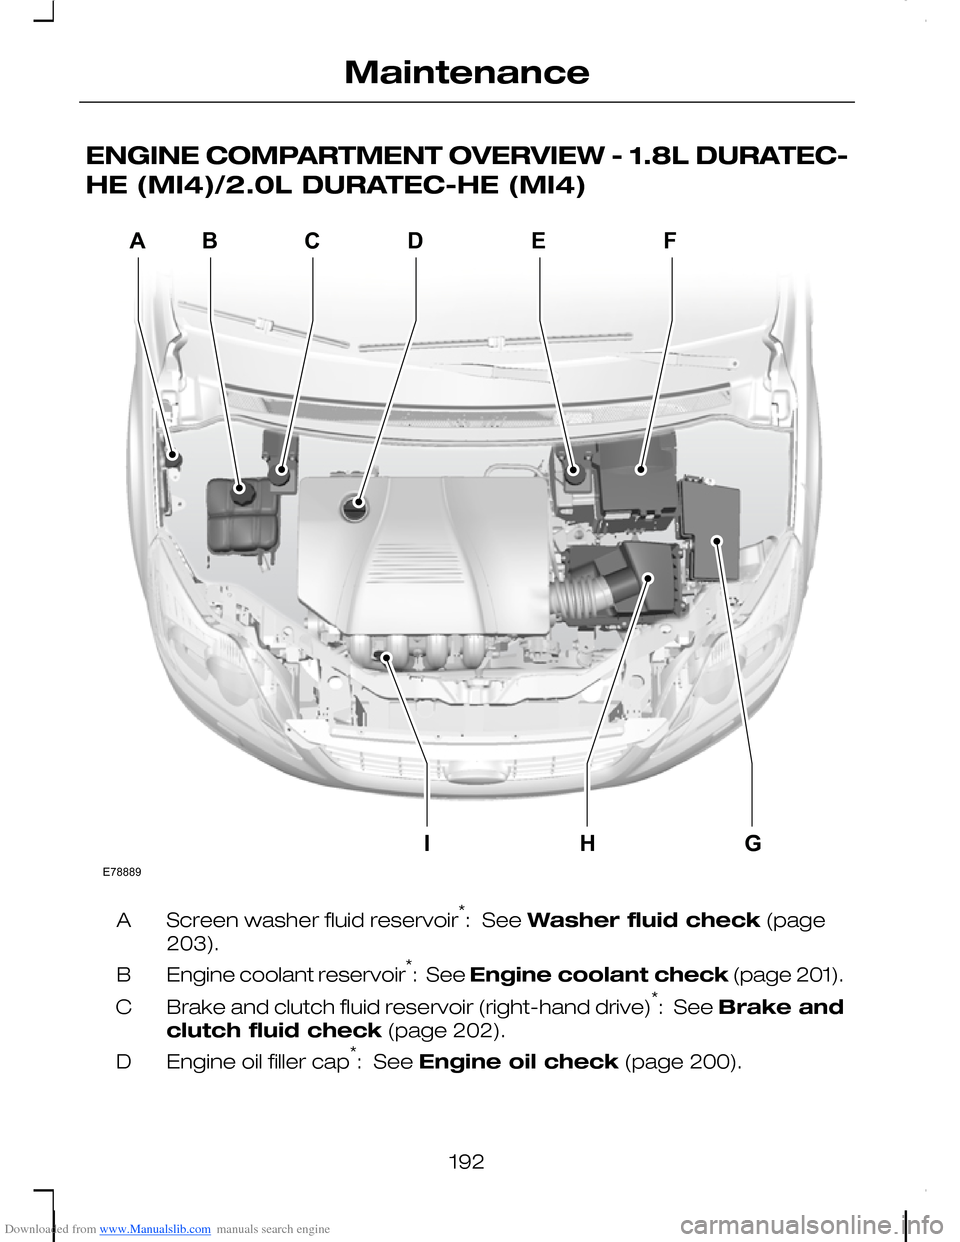 FORD C MAX 2008 1.G User Guide Downloaded from www.Manualslib.com manuals search engine ENGINE COMPARTMENT OVERVIEW - 1.8L DURATEC-
HE (MI4)/2.0L DURATEC-HE (MI4)
Screen washer fluid reservoir*:  See Washer fluid check (page
203).
